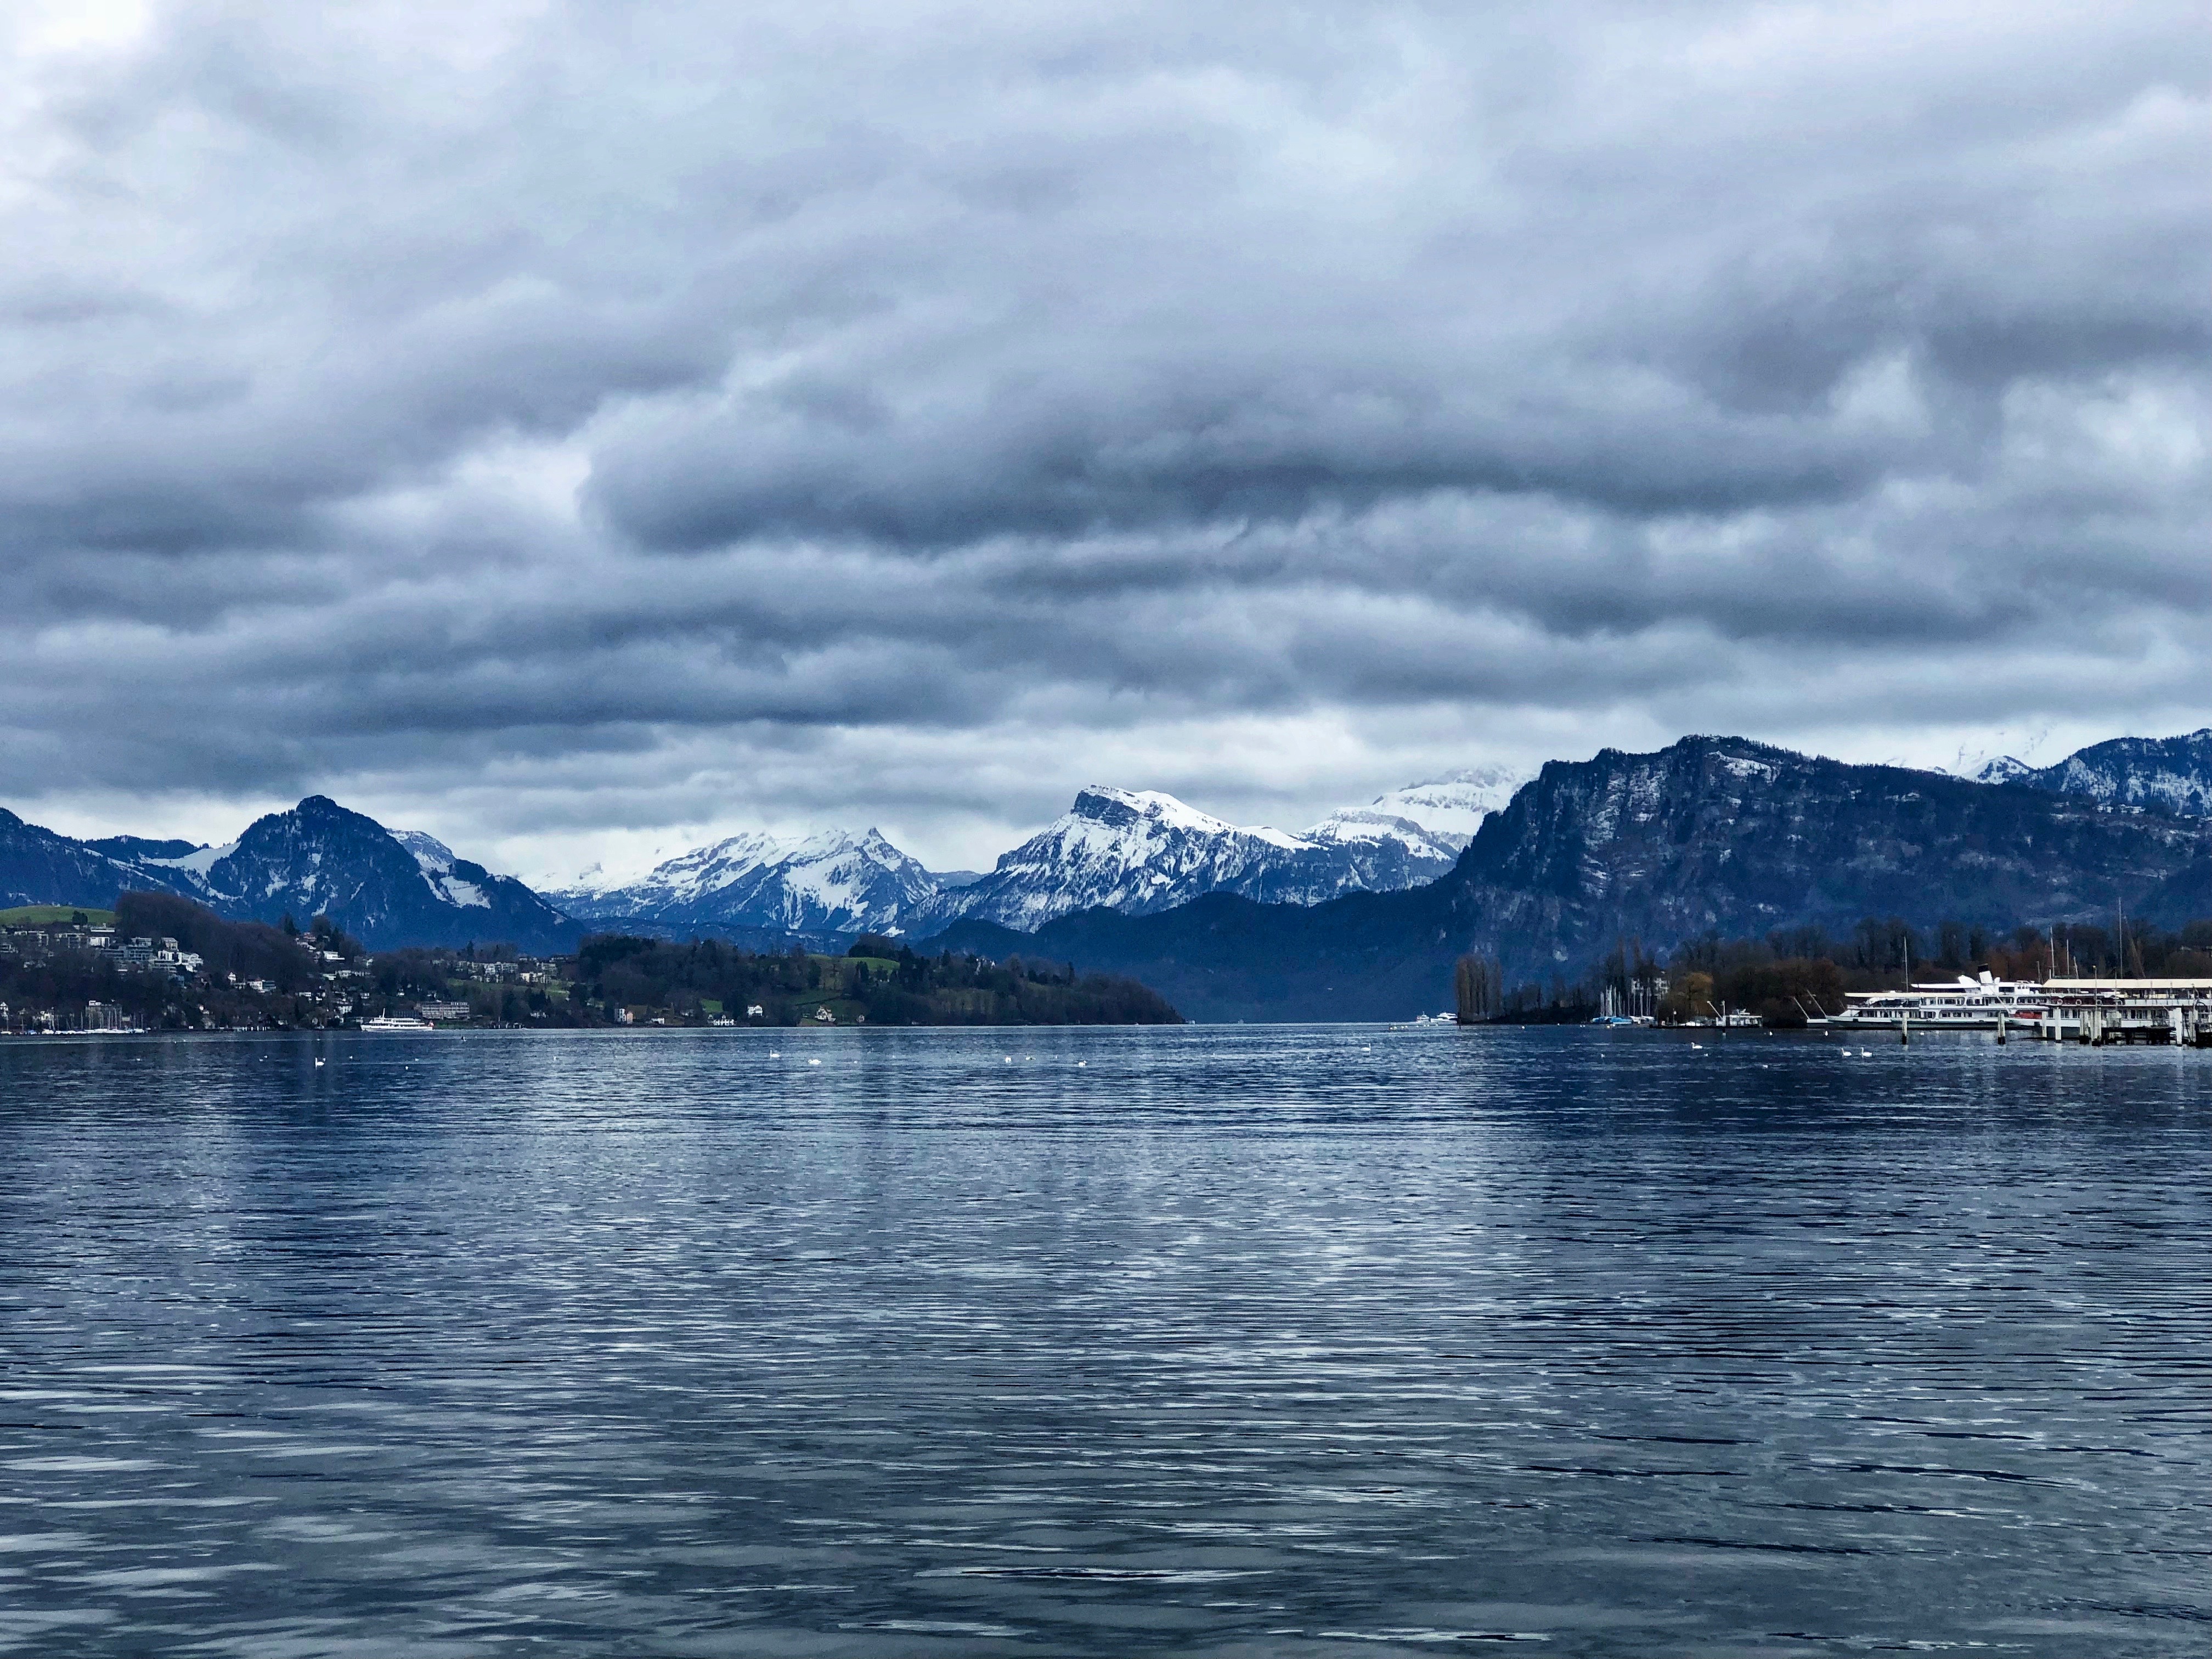 Lake Lucerne with the snowcapped Alps in the background.